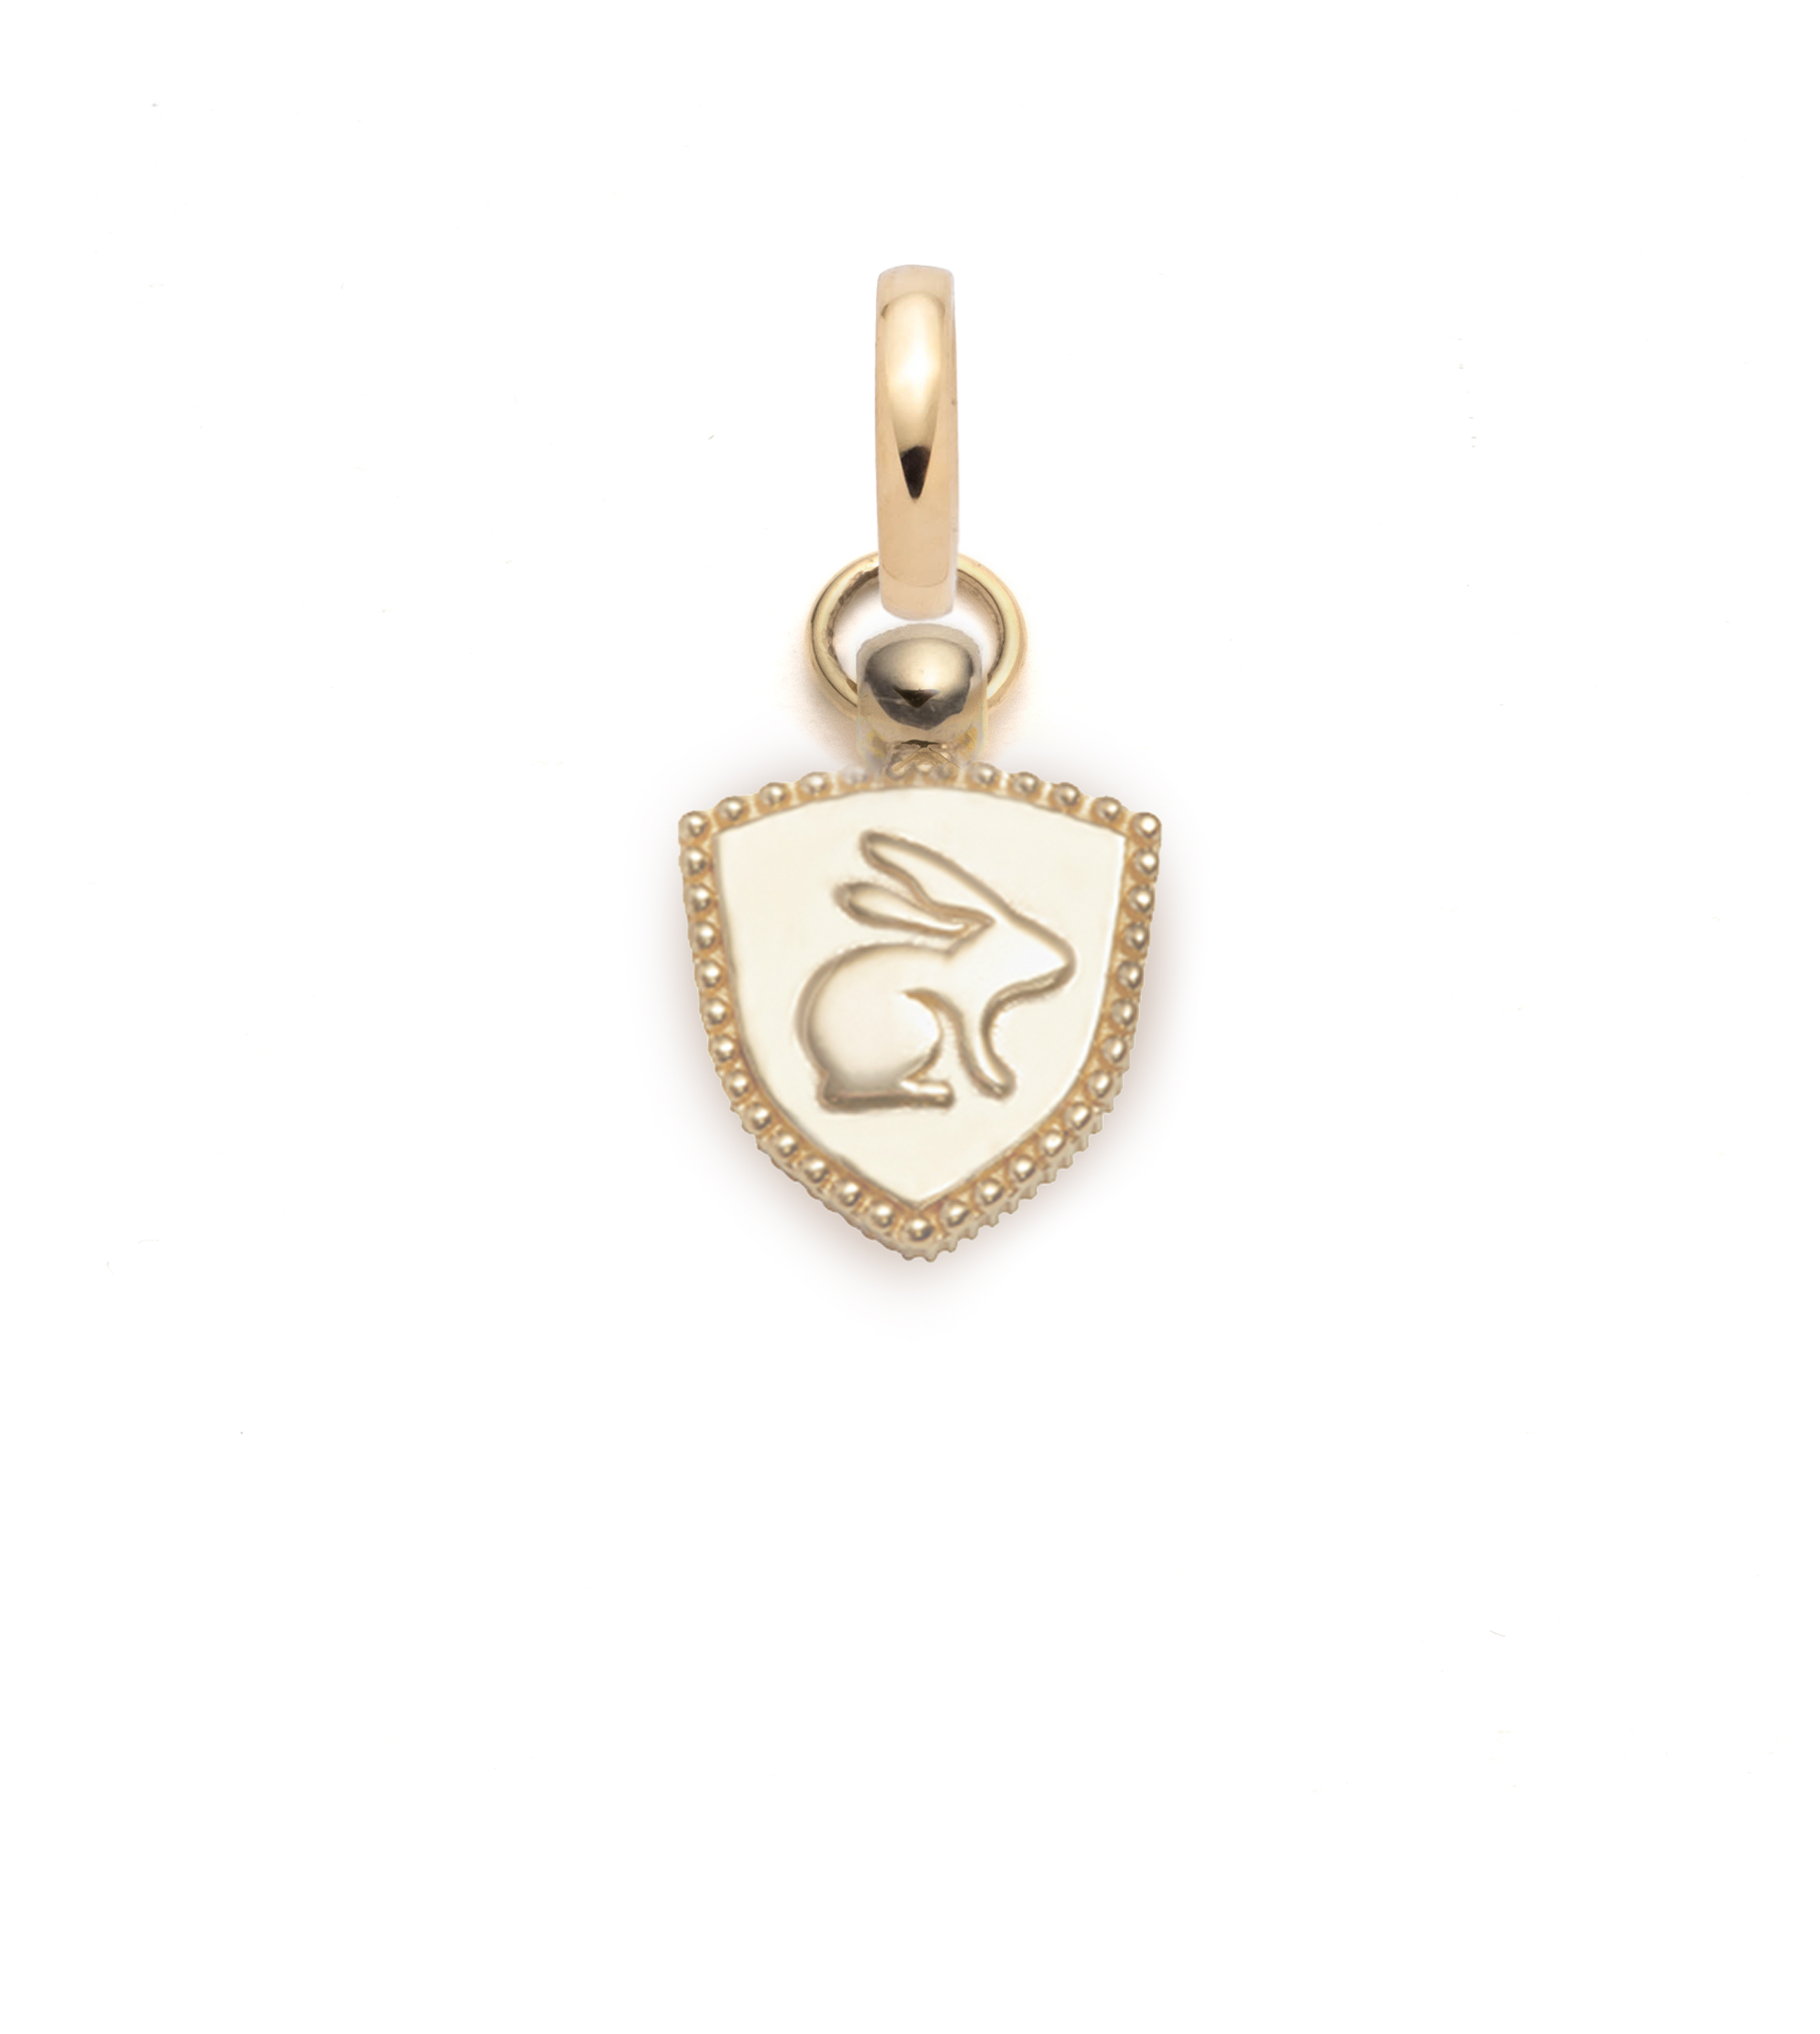 Bunny - Love : Miniature Crest with Oval Push Gate